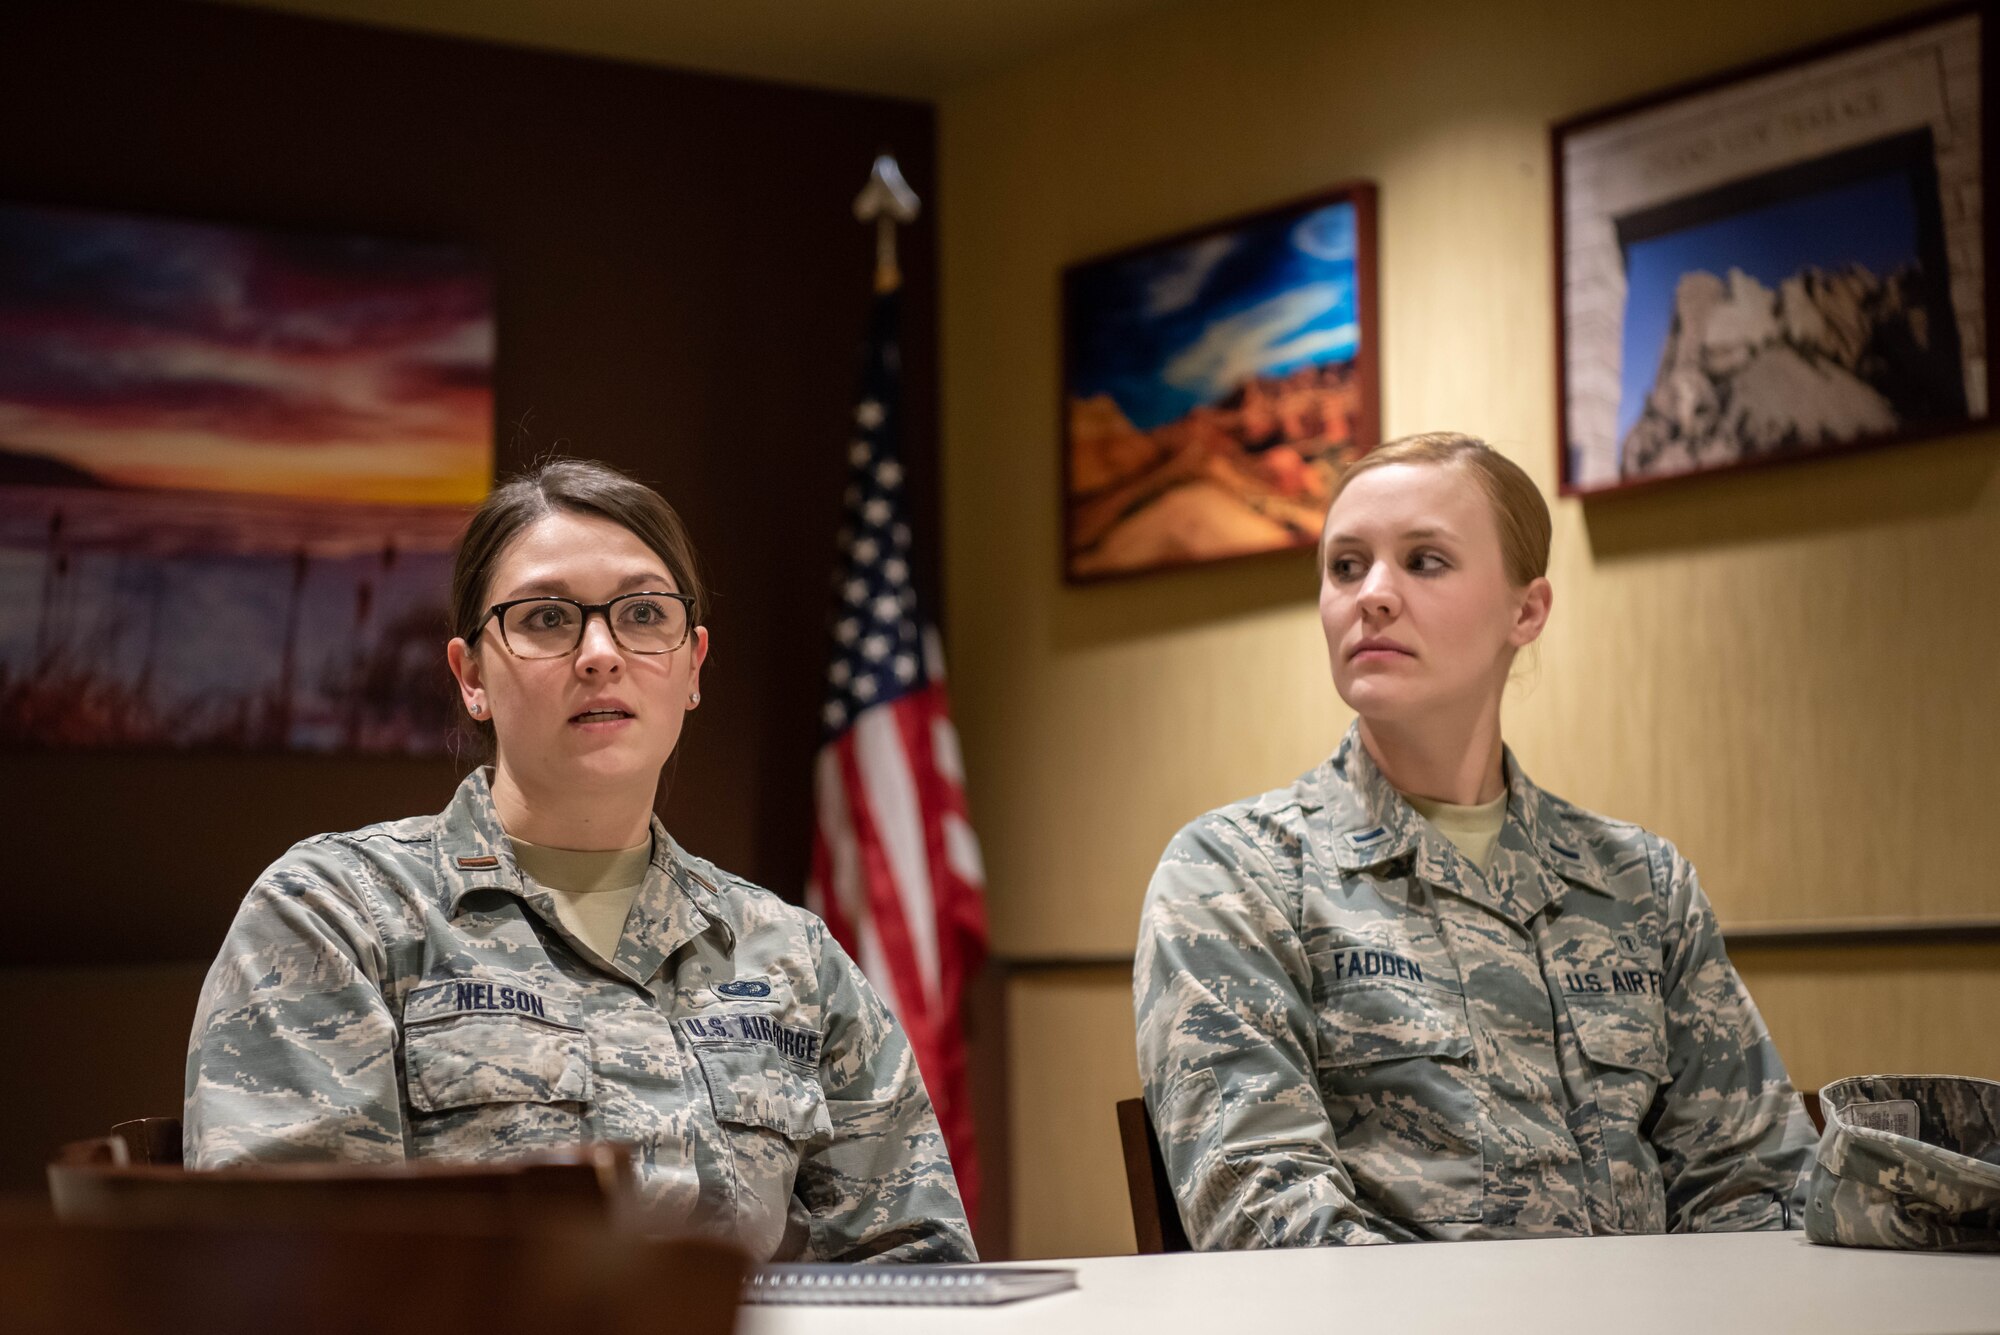 Airmen attend the inaugural 28th Bomb Wing Women’s Lean In Circle at the Raider Café conference room on Ellsworth Air Force Base, S.D., March 26, 2019. Both men and women serving on Ellsworth AFB were invited to attend to discuss and break down barriers to success and happiness that are based on gender. (U.S. Air Force photo by Tech. Sgt. Jette Carr)